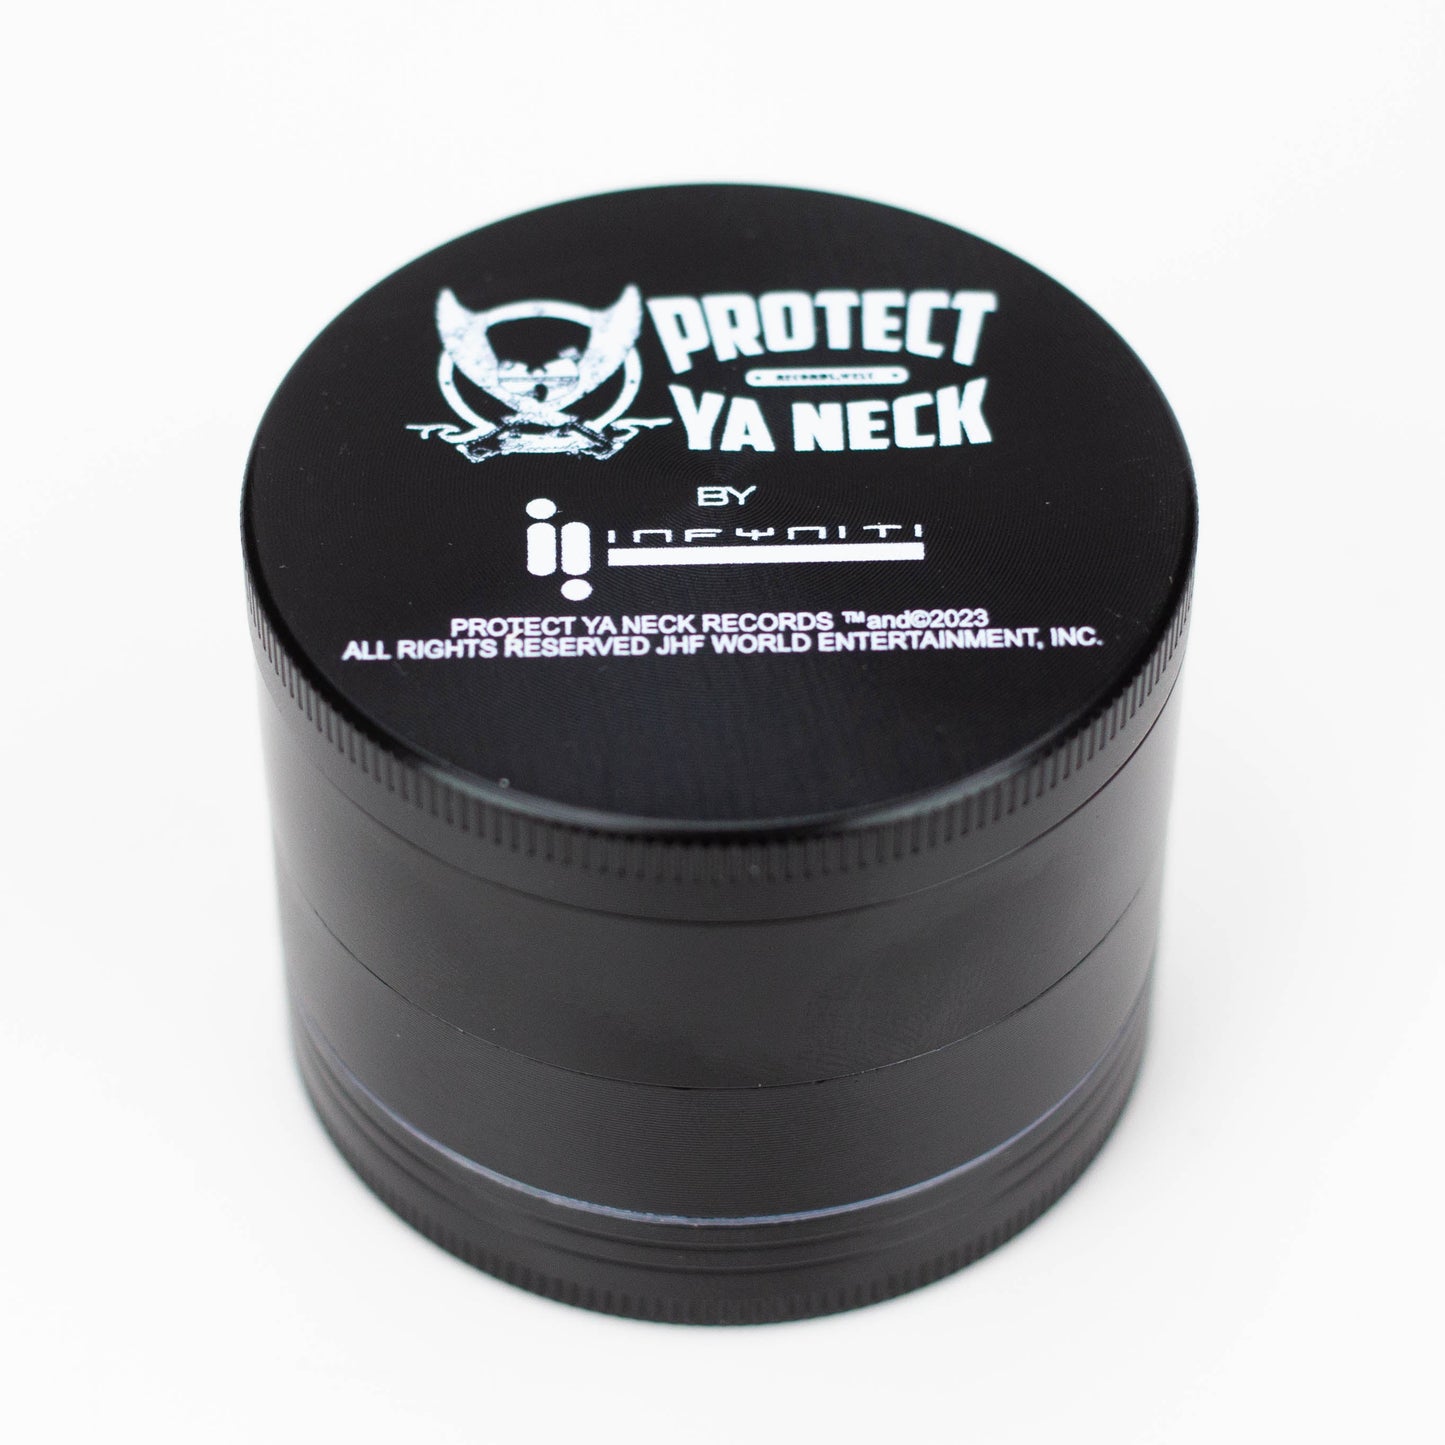 PROTECT YA NECK - 4 parts metal red grinder by Infyniti_8